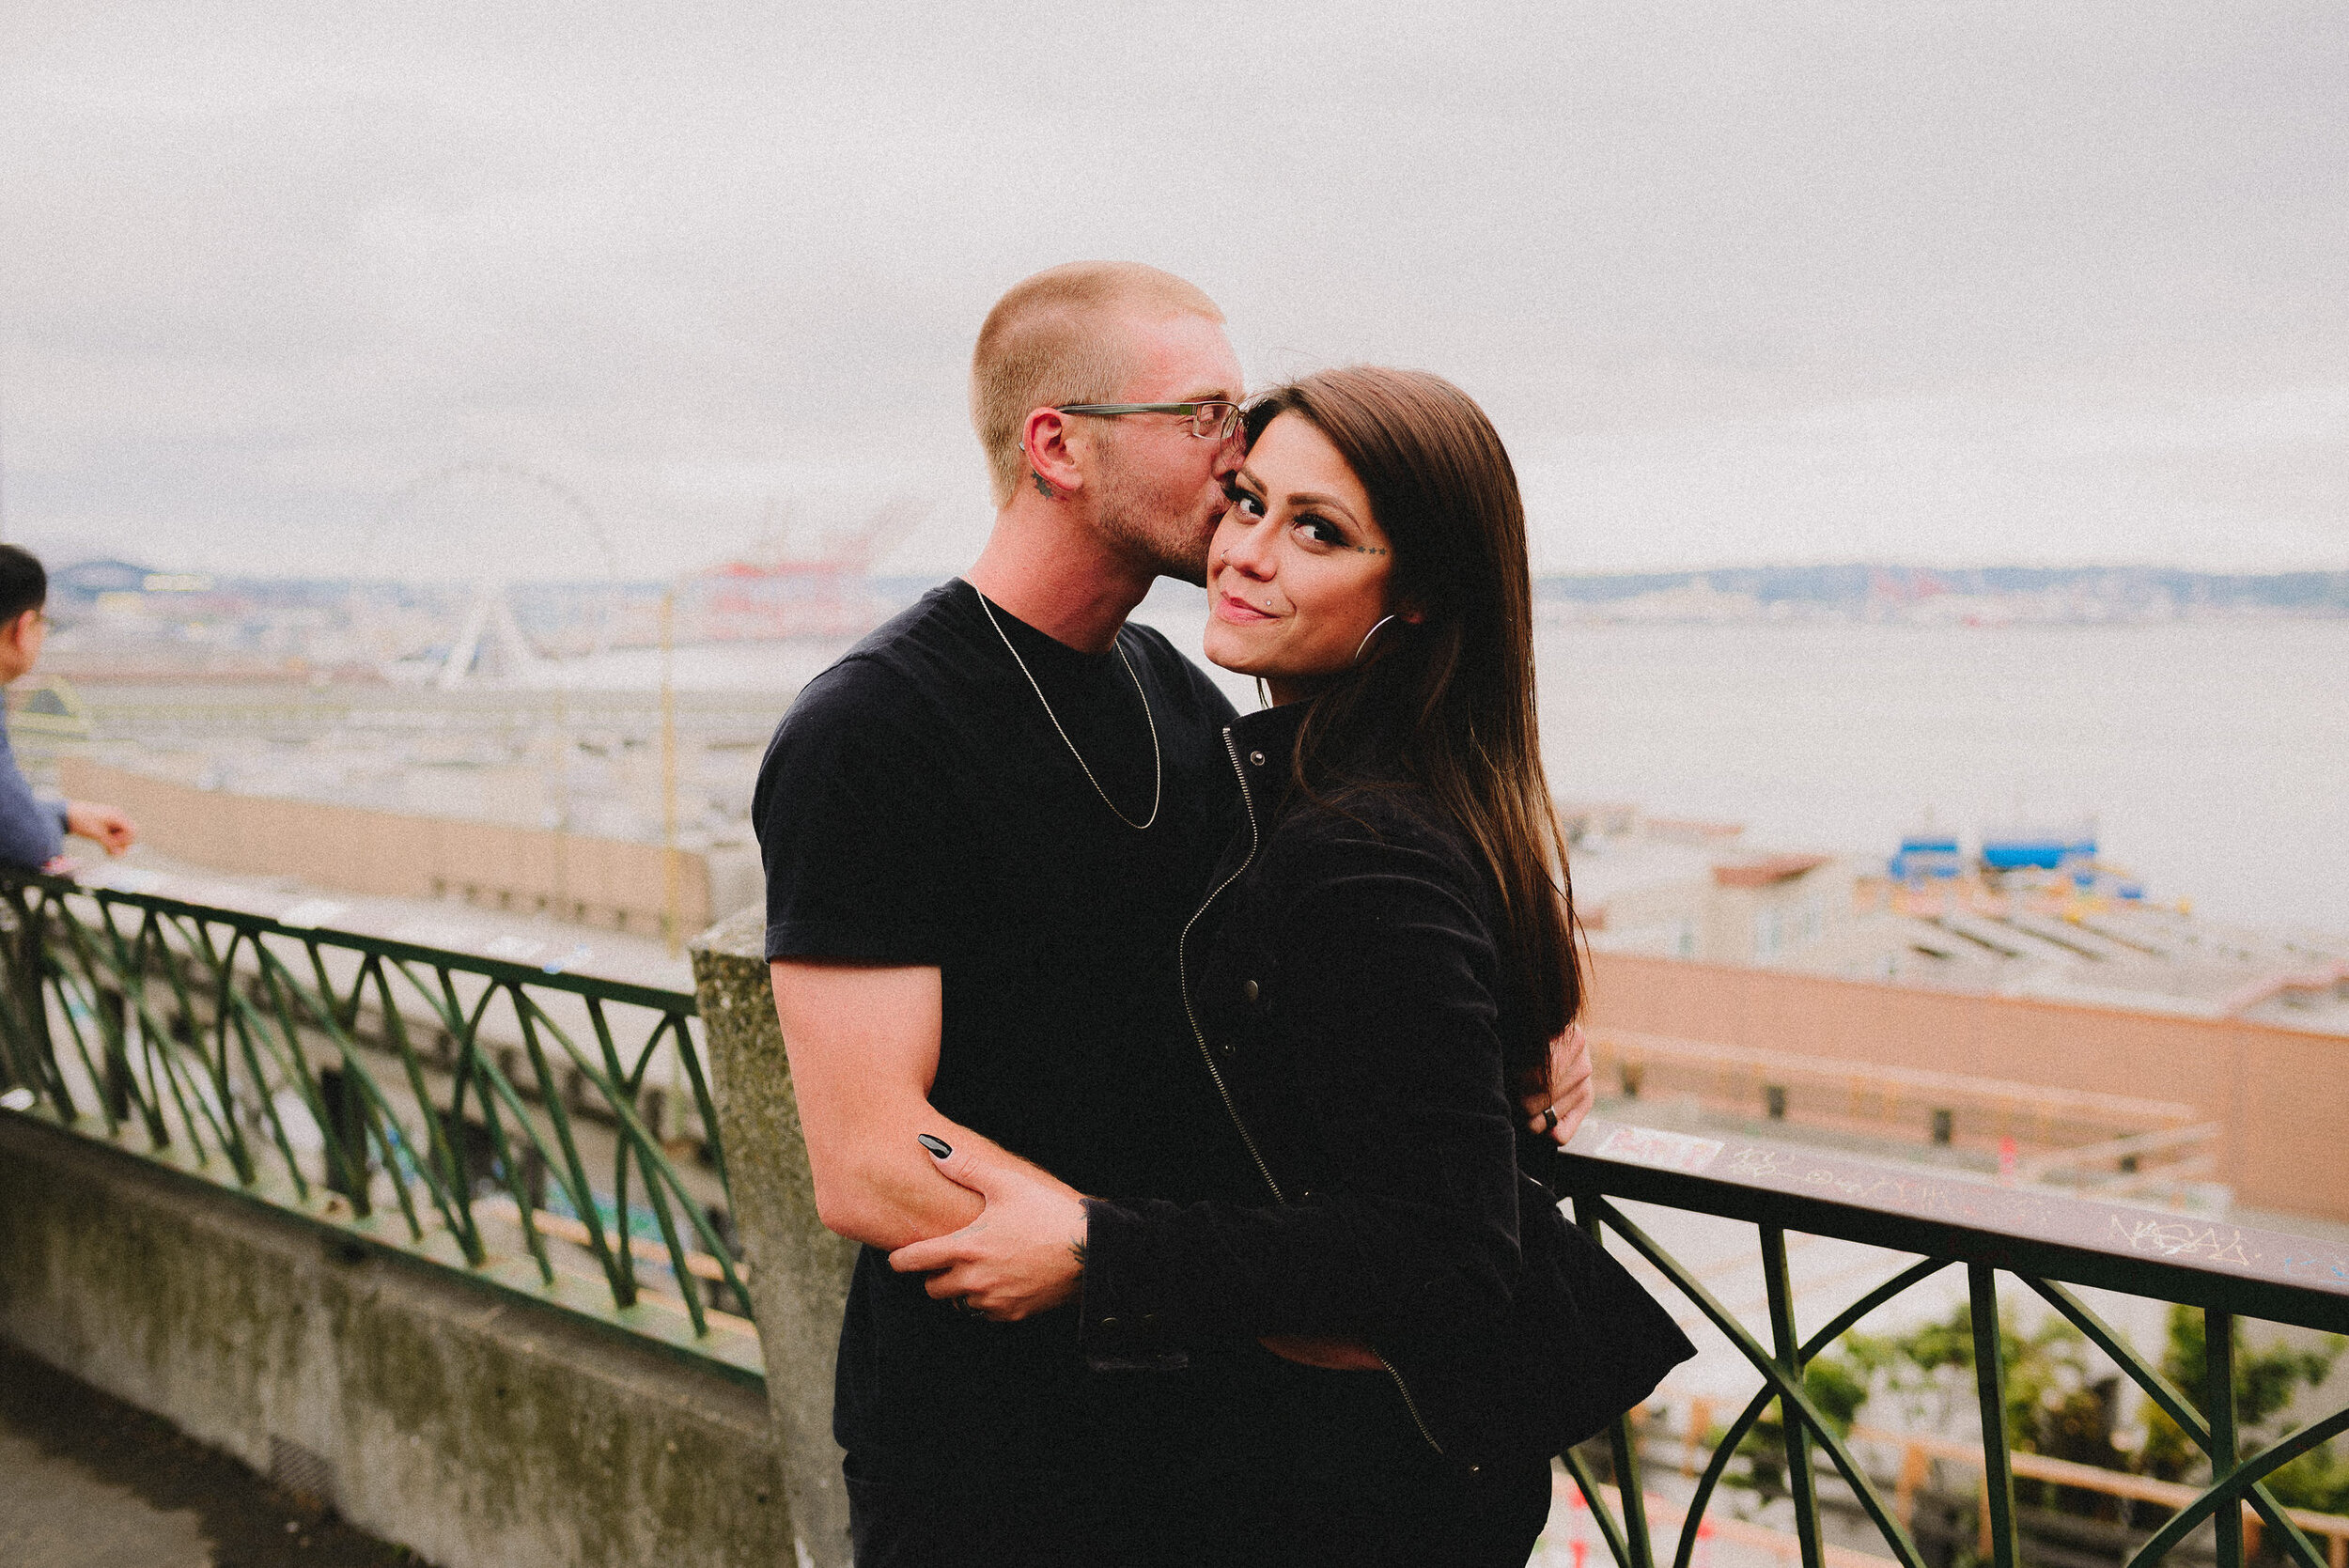 downtown-seattle-wa-engagement-session-way-up-north-photography (49).jpg